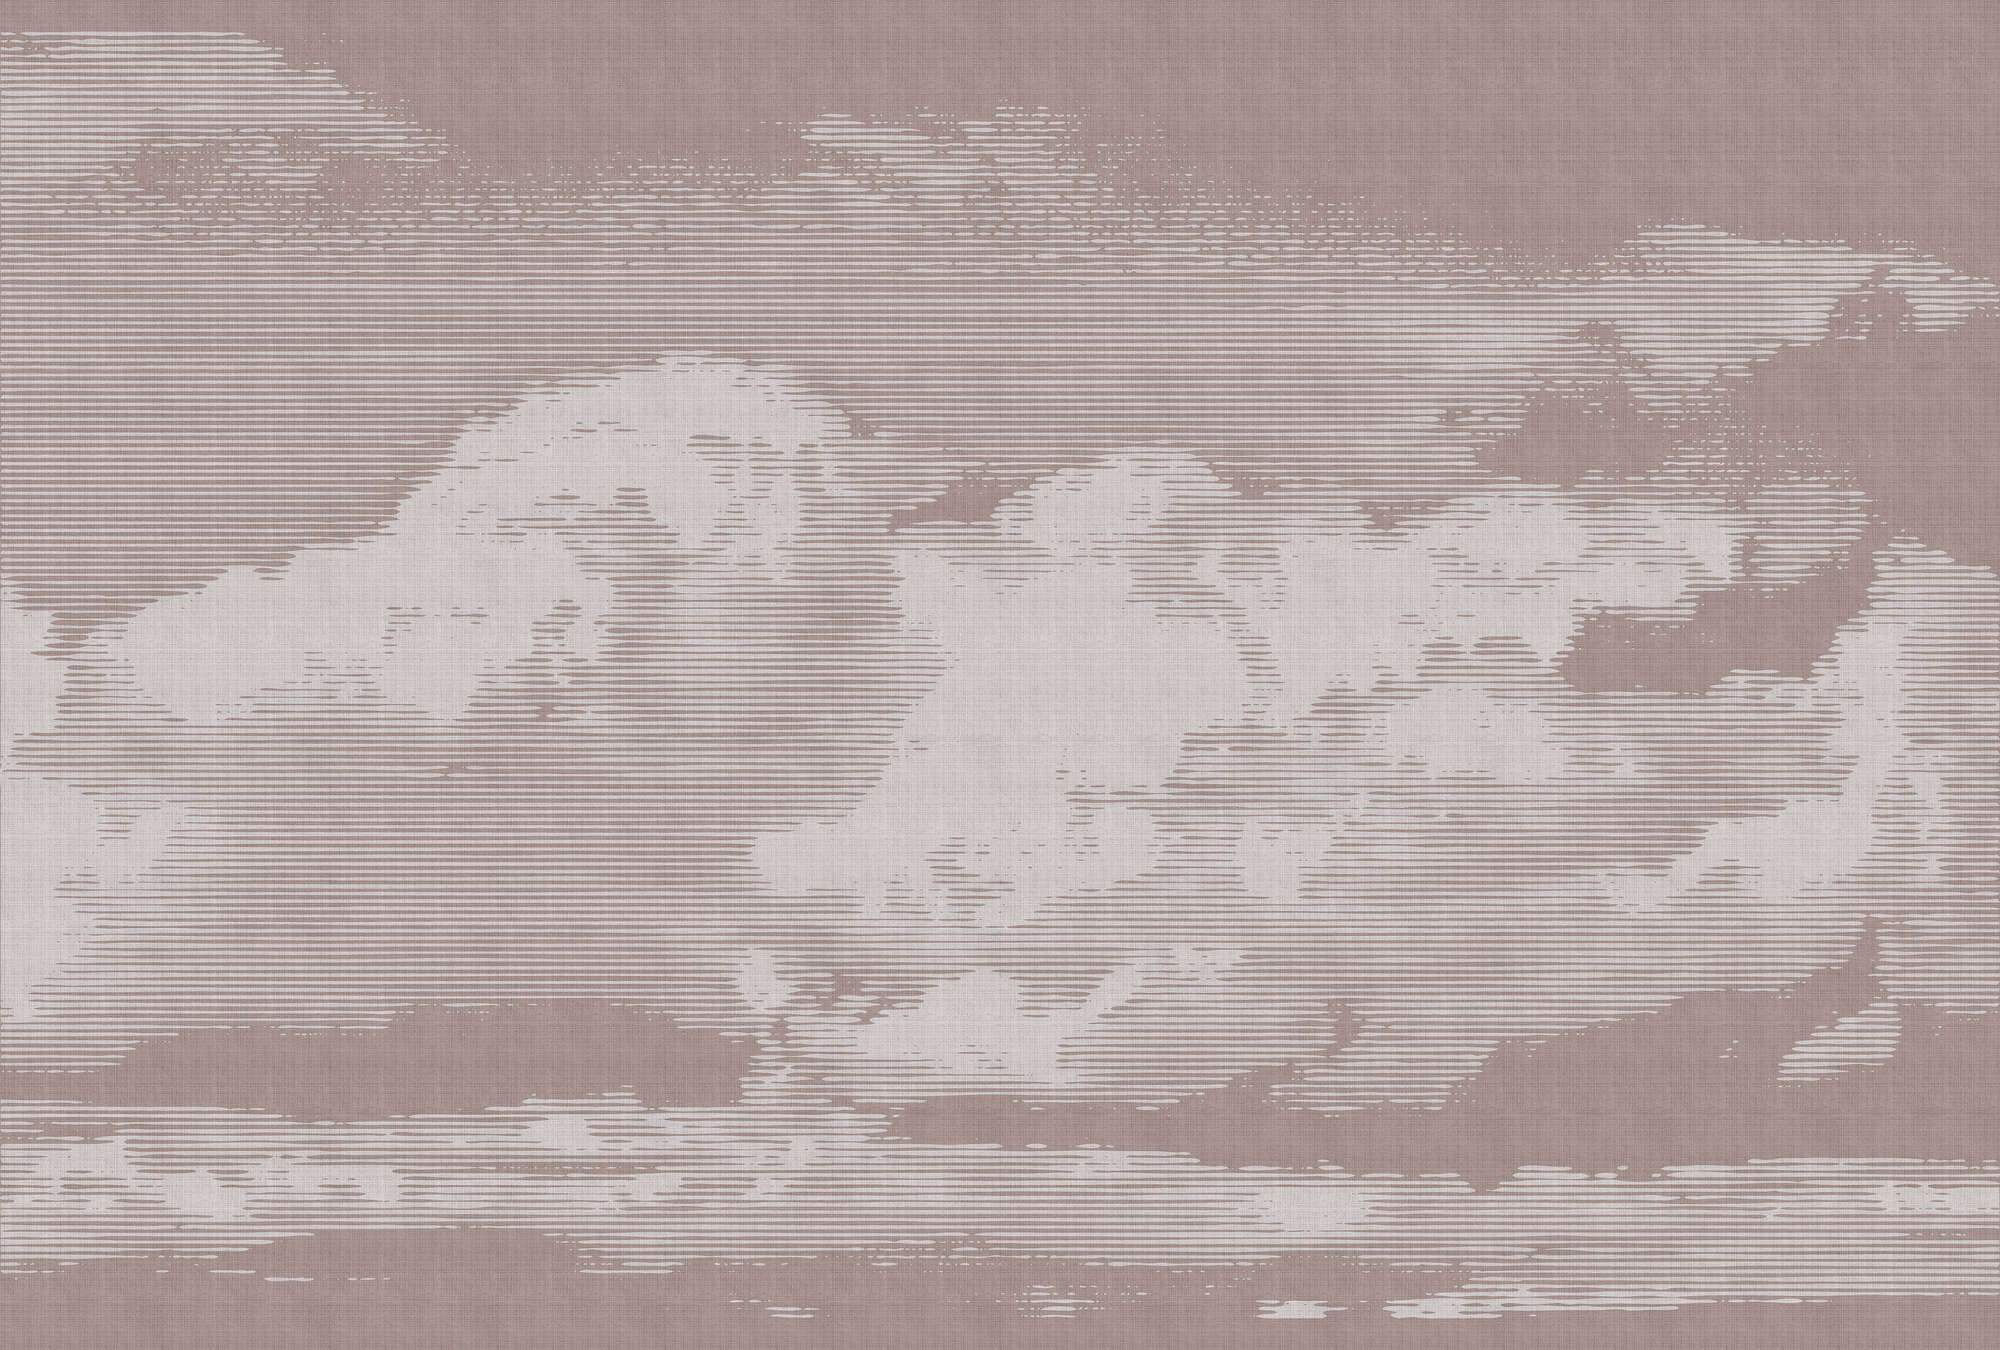             Clouds 3 - Heavenly wallpaper with cloud motif - Nature linen structure - Grey, Pink | Pearl smooth fleece
        